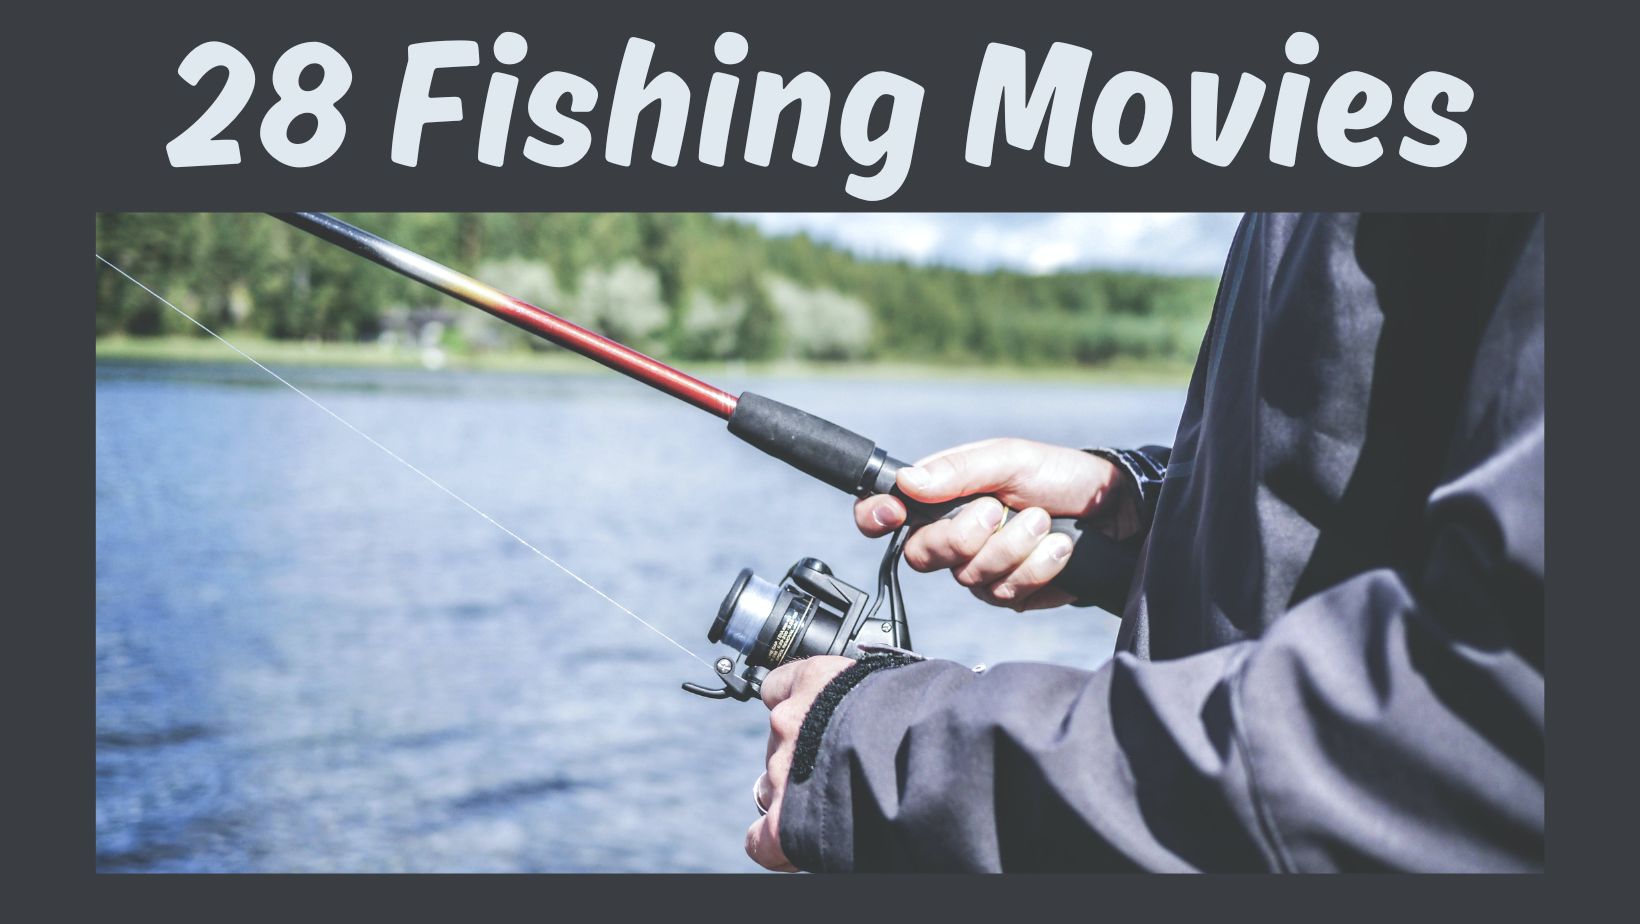 28 Fishing Movies: A List of the Best Films About Fishing